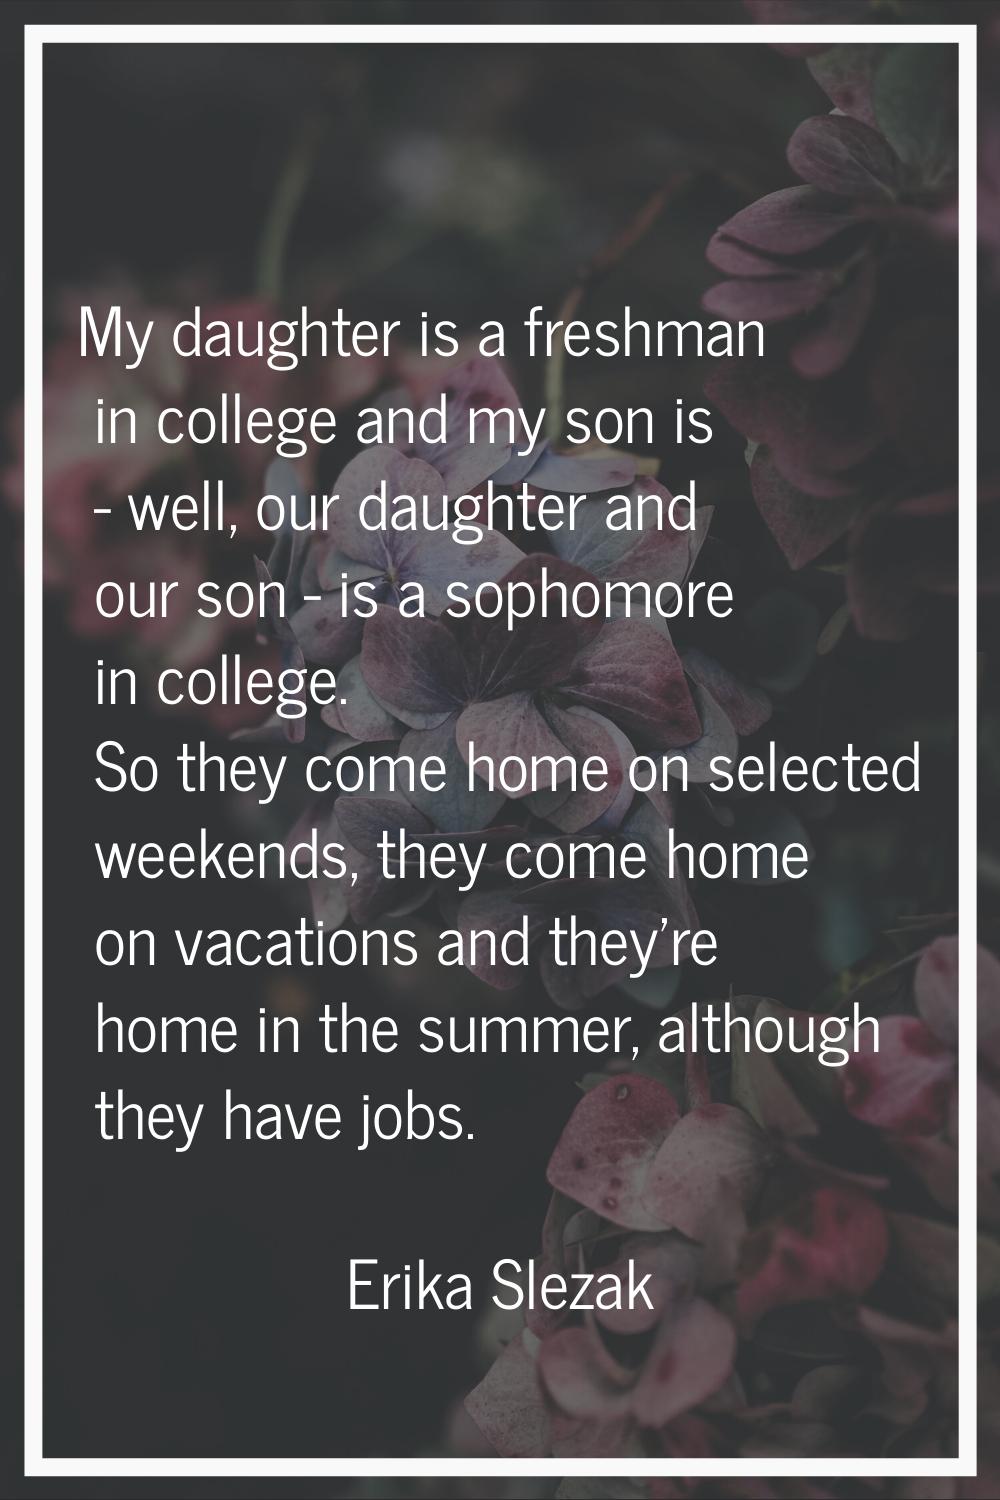 My daughter is a freshman in college and my son is - well, our daughter and our son - is a sophomor